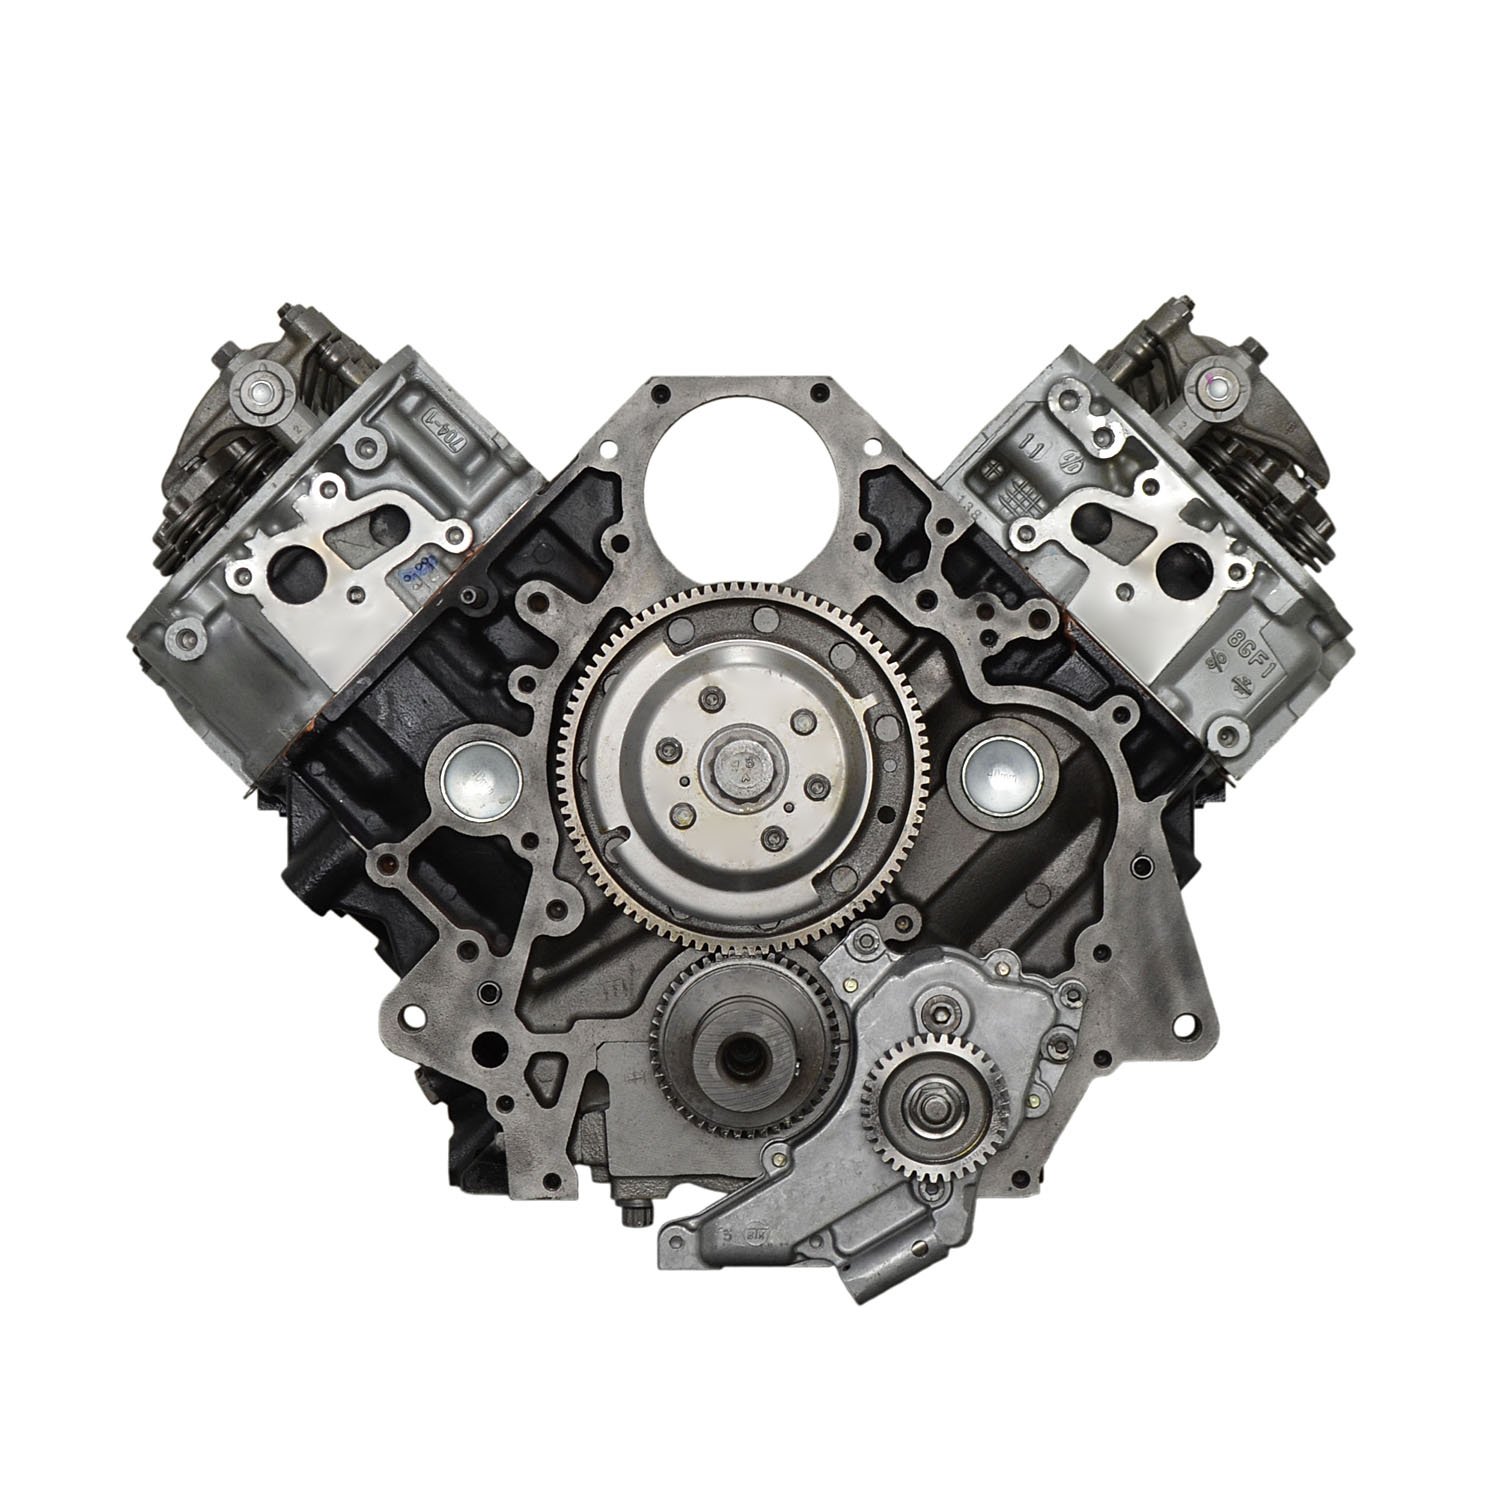 DCX8 Remanufactured Crate Engine for 2007-2010 Chevy/GMC Light Duty Truck with 6.6L Duramax Turbo Diesel V8